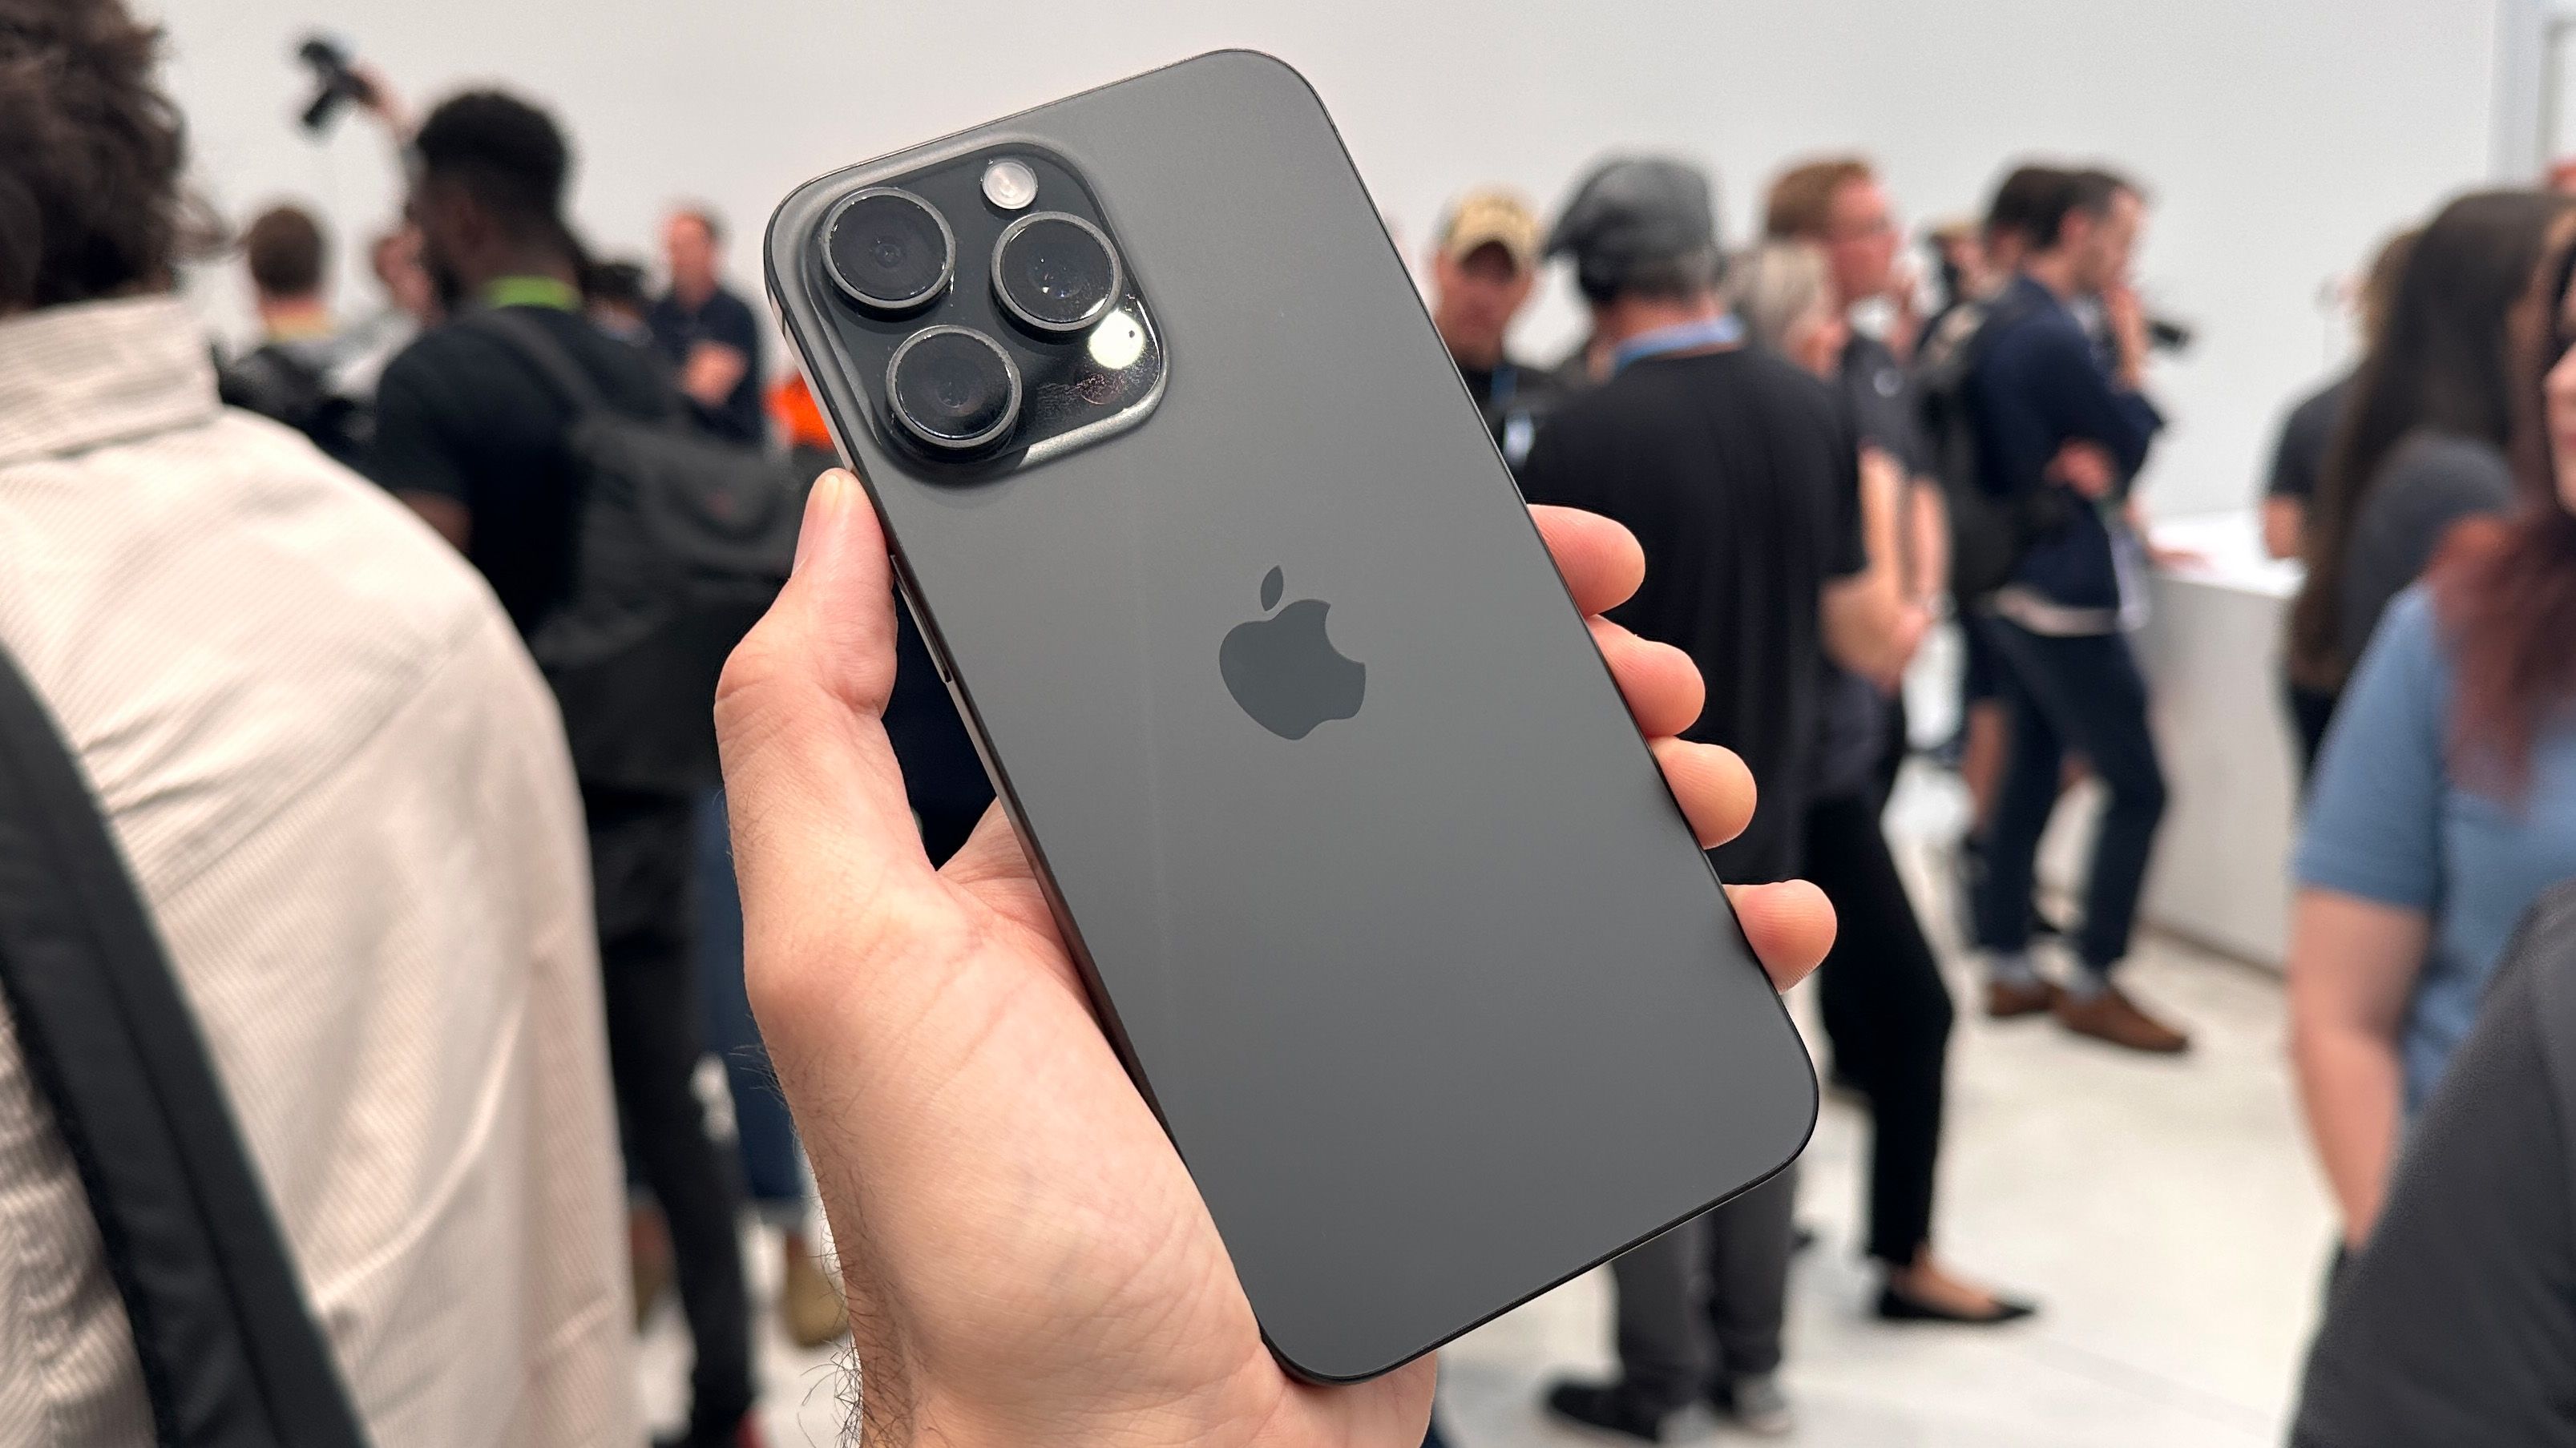 The iPhone 15 Pro Max could become the most expensive iPhone ever